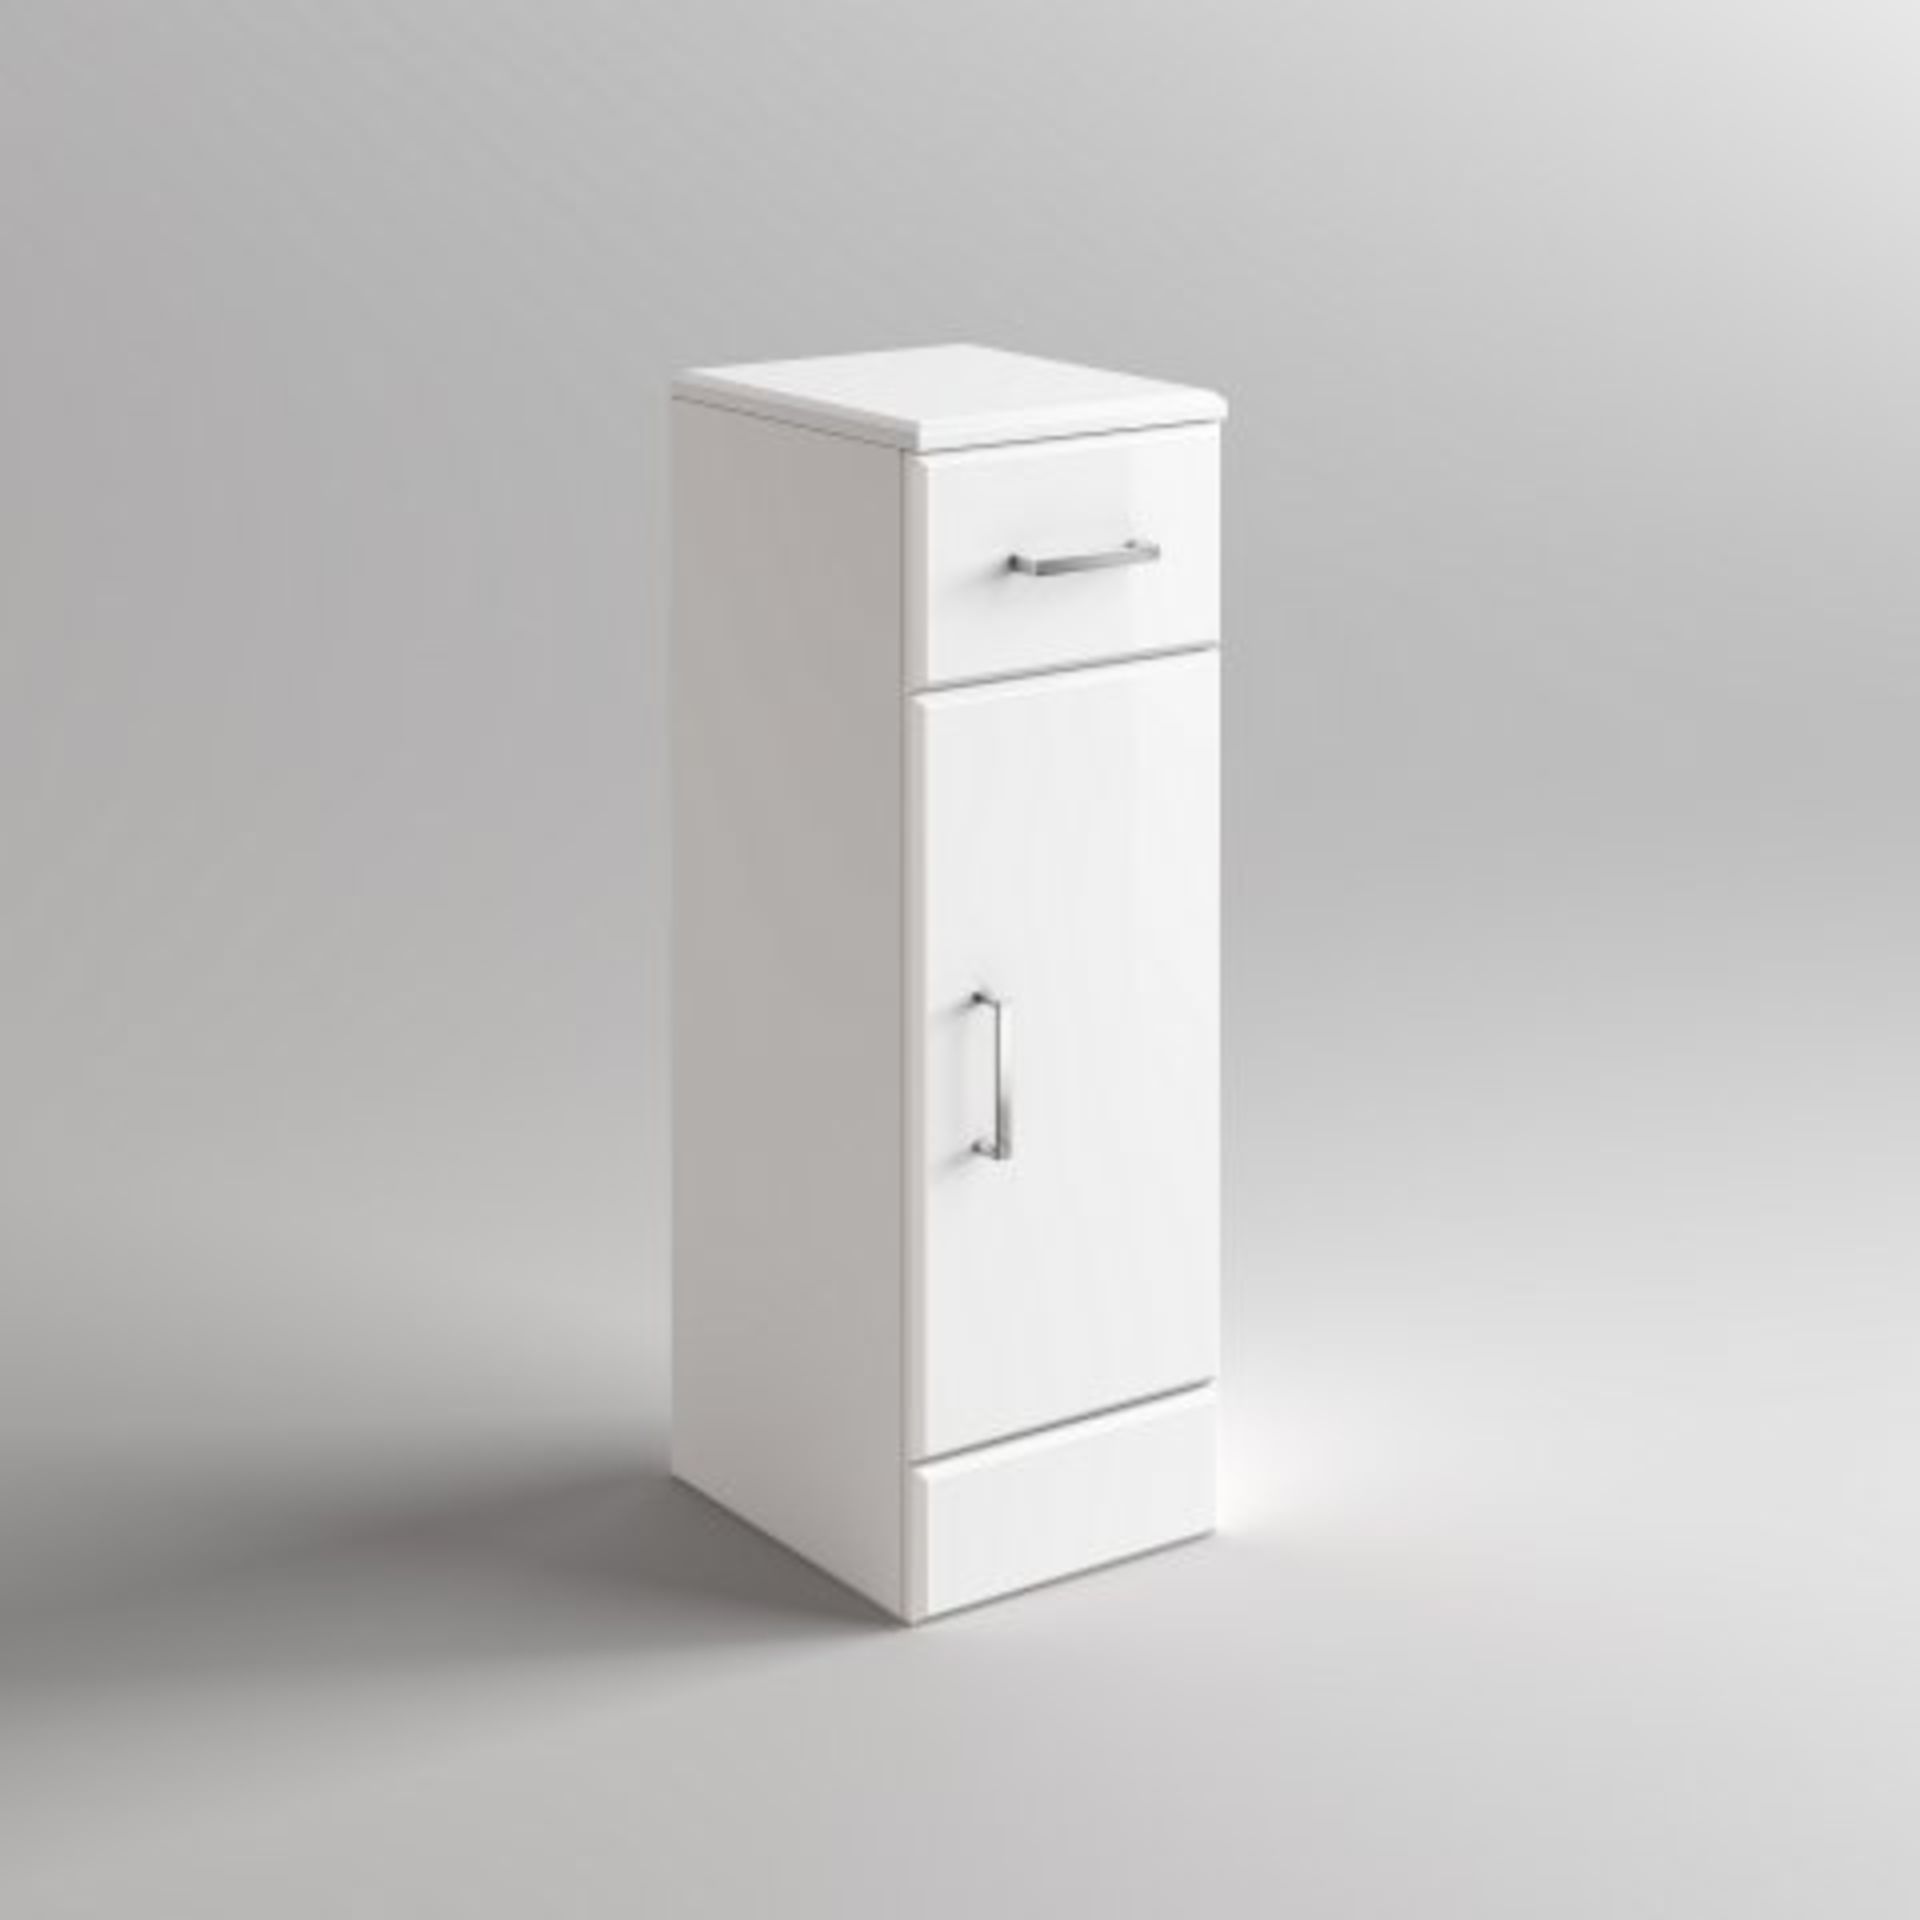 N5 - 250x300mm Quartz Gloss White Small Unit. RRP £143.99. This state-of-the-art white bathroom - Image 3 of 3